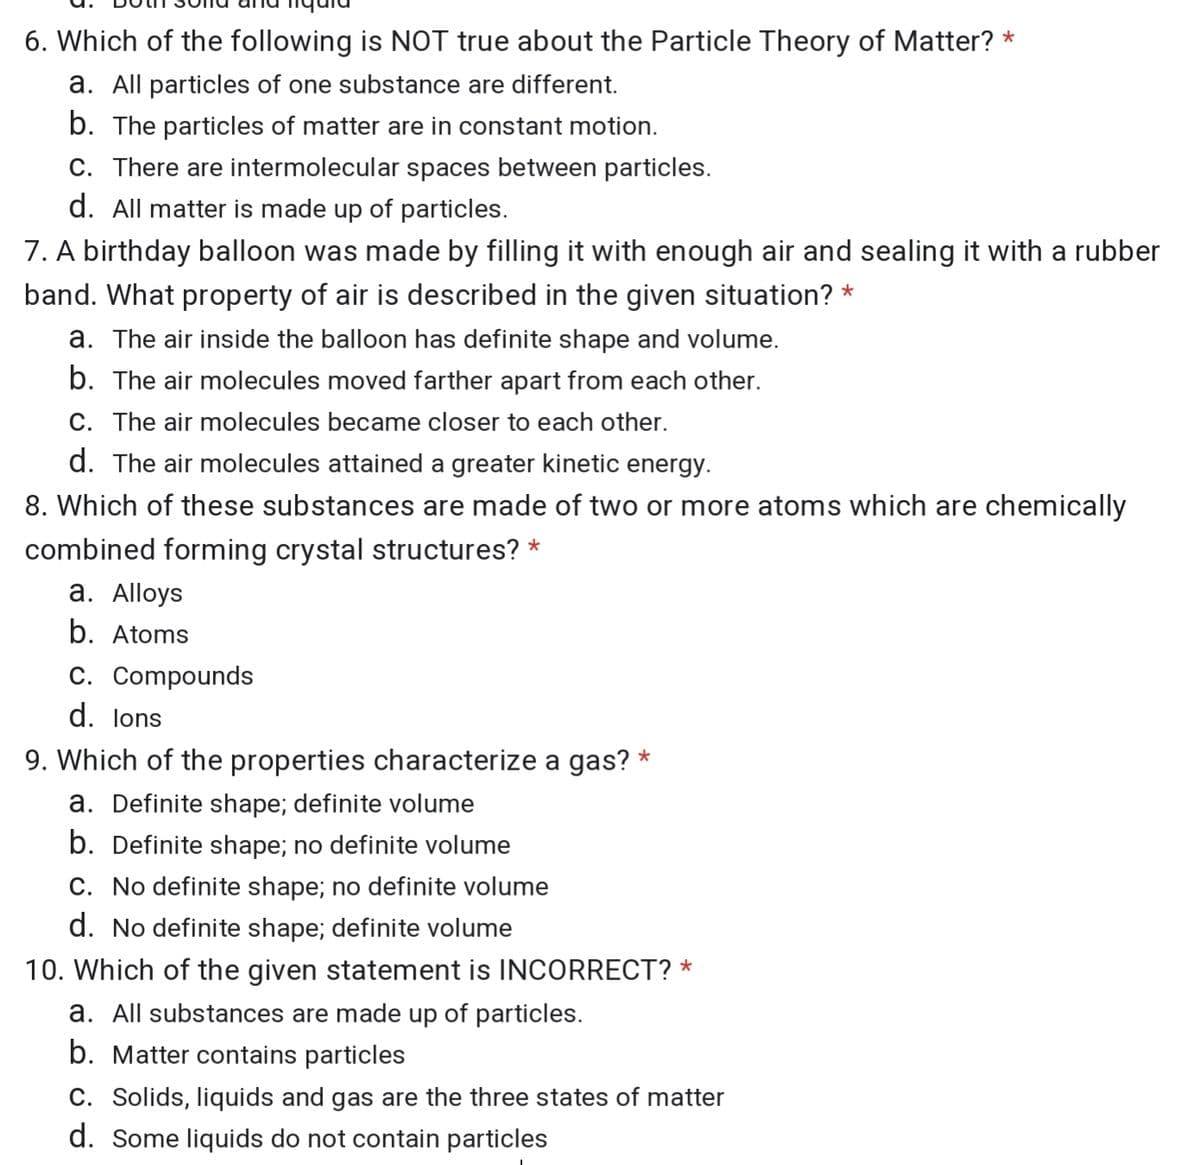 6. Which of the following is NOT true about the Particle Theory of Matter? *
a. All particles of one substance are different.
b. The particles of matter are in constant motion.
C. There are intermolecular spaces between particles.
d. All matter is made up of particles.
7. A birthday balloon was made by filling it with enough air and sealing it with a rubber
band. What property of air is described in the given situation? *
a. The air inside the balloon has definite shape and volume.
b. The air molecules moved farther apart from each other.
C. The air molecules became closer to each other.
d. The air molecules attained a greater kinetic energy.
8. Which of these substances are made of two or more atoms which are chemically
combined forming crystal structures? *
a. Alloys
b. Atoms
C. Compounds
d. lons
9. Which of the properties characterize a gas? *
a. Definite shape; definite volume
b. Definite shape; no definite volume
C. No definite shape; no definite volume
d. No definite shape; definite volume
10. Which of the given statement is INCORRECT? *
a. All substances are made up of particles.
b. Matter contains particles
C. Solids, liquids and gas are the three states of matter
d. Some liquids do not contain particles
